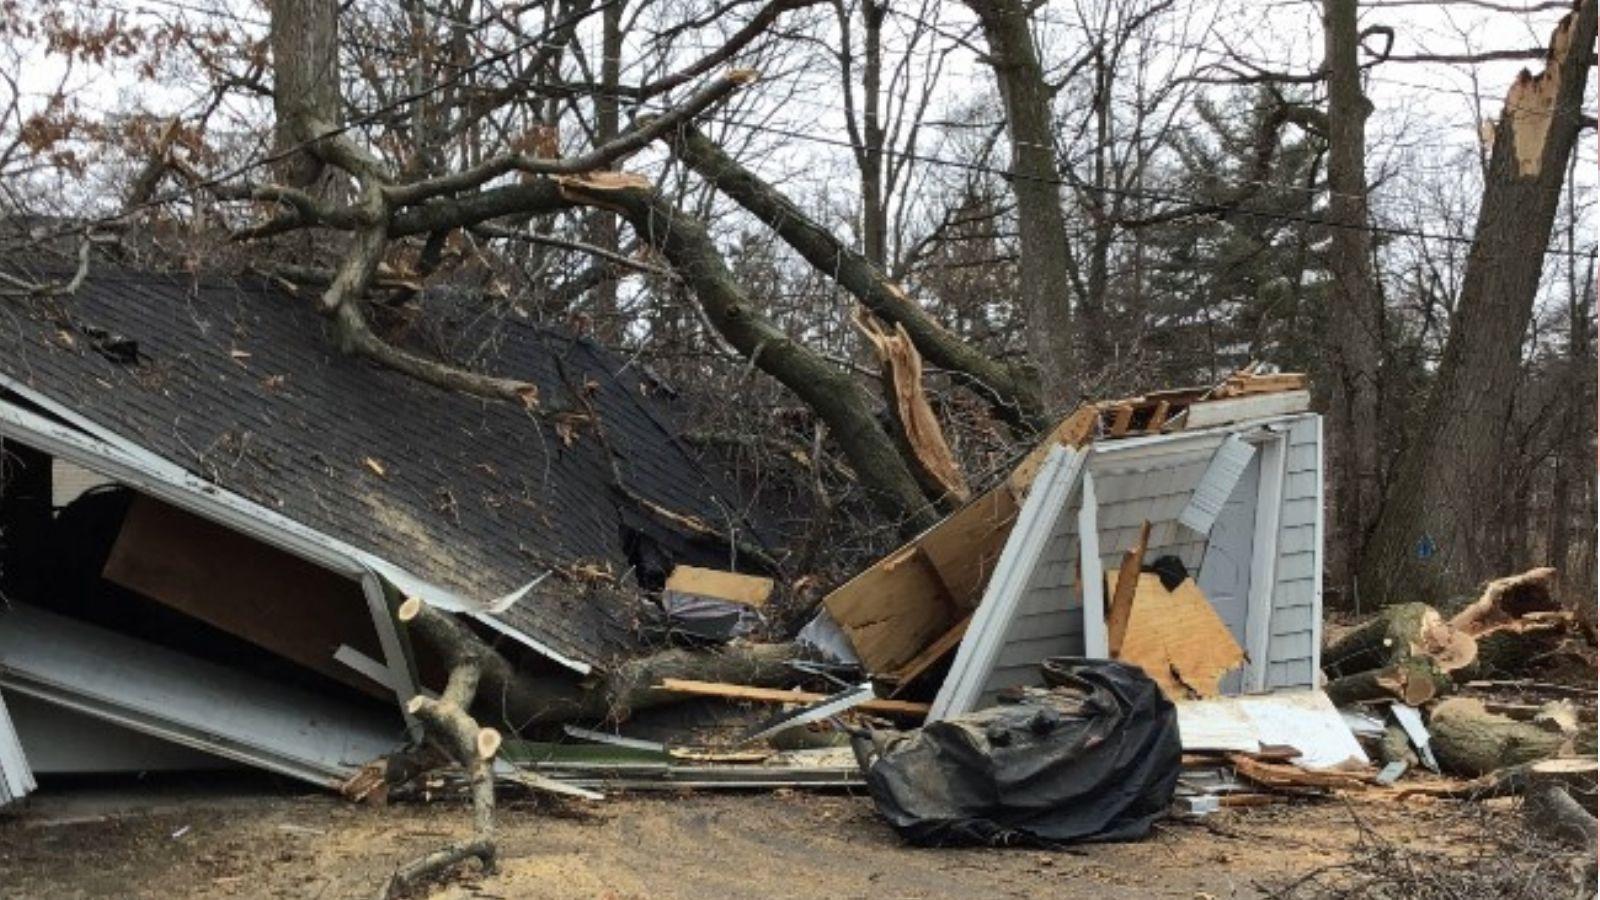 NWS: March 31 storms produced a dozen tornadoes in southern Wisconsin